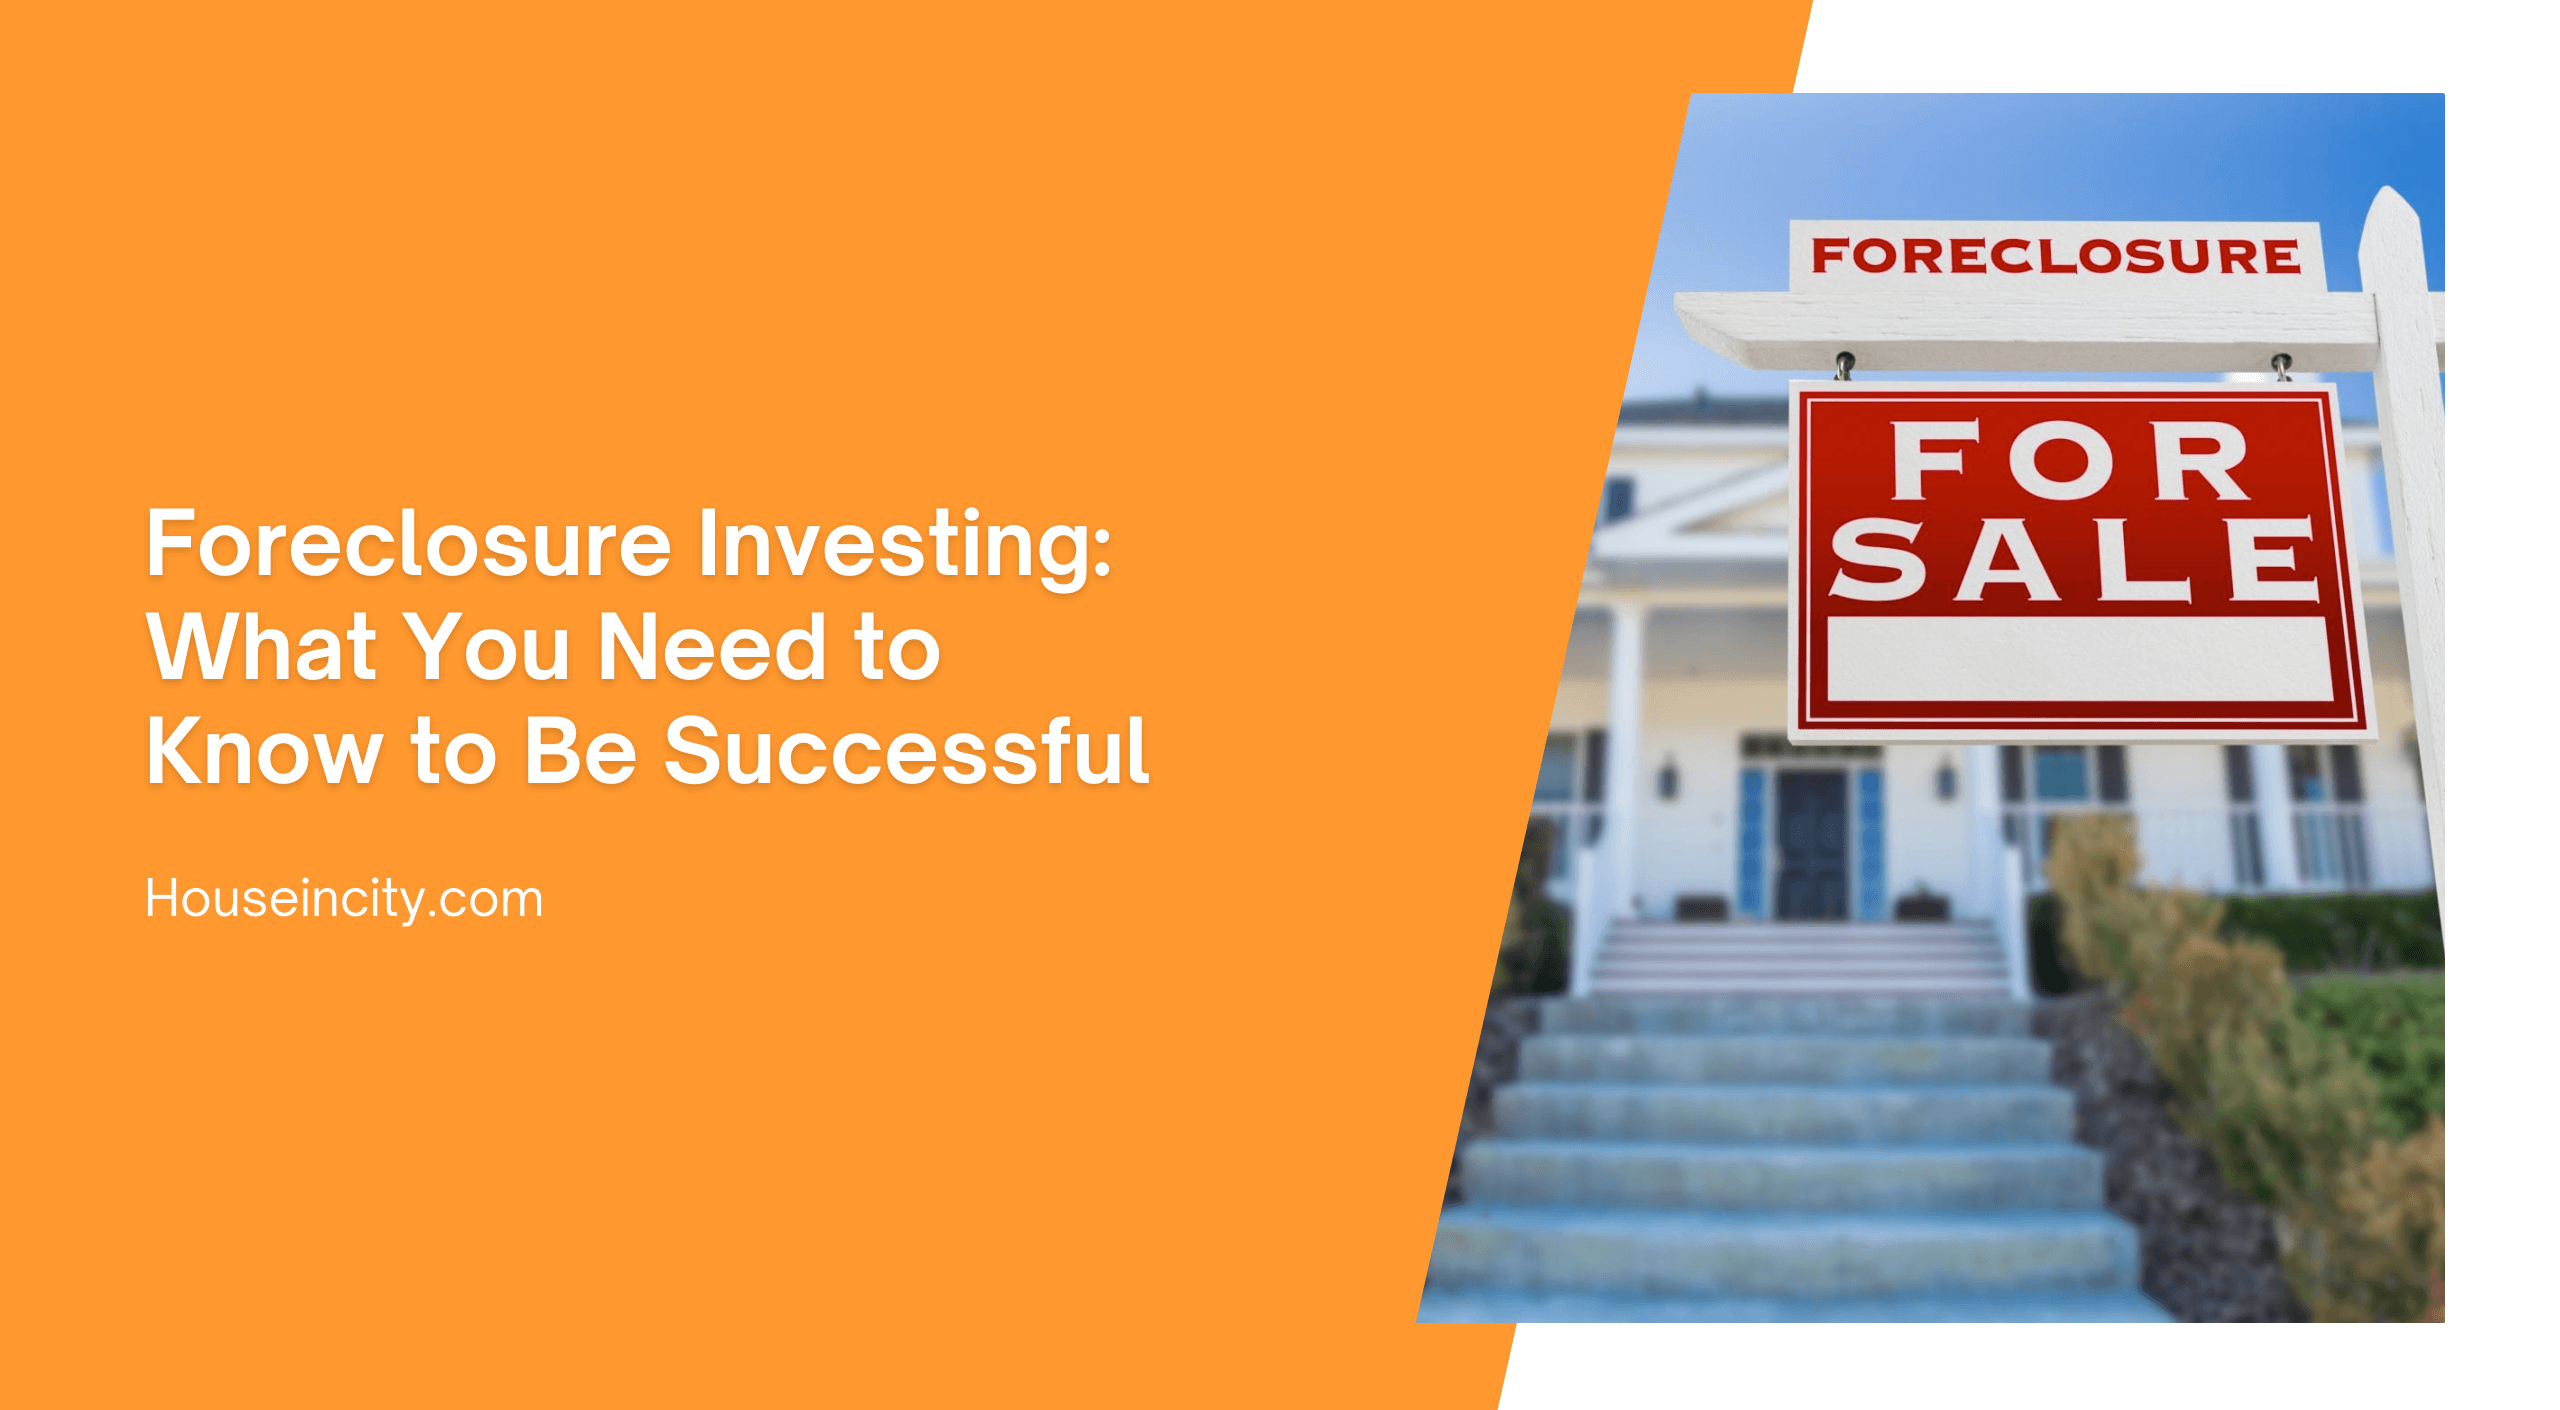 Foreclosure Investing: What You Need to Know to Be Successful